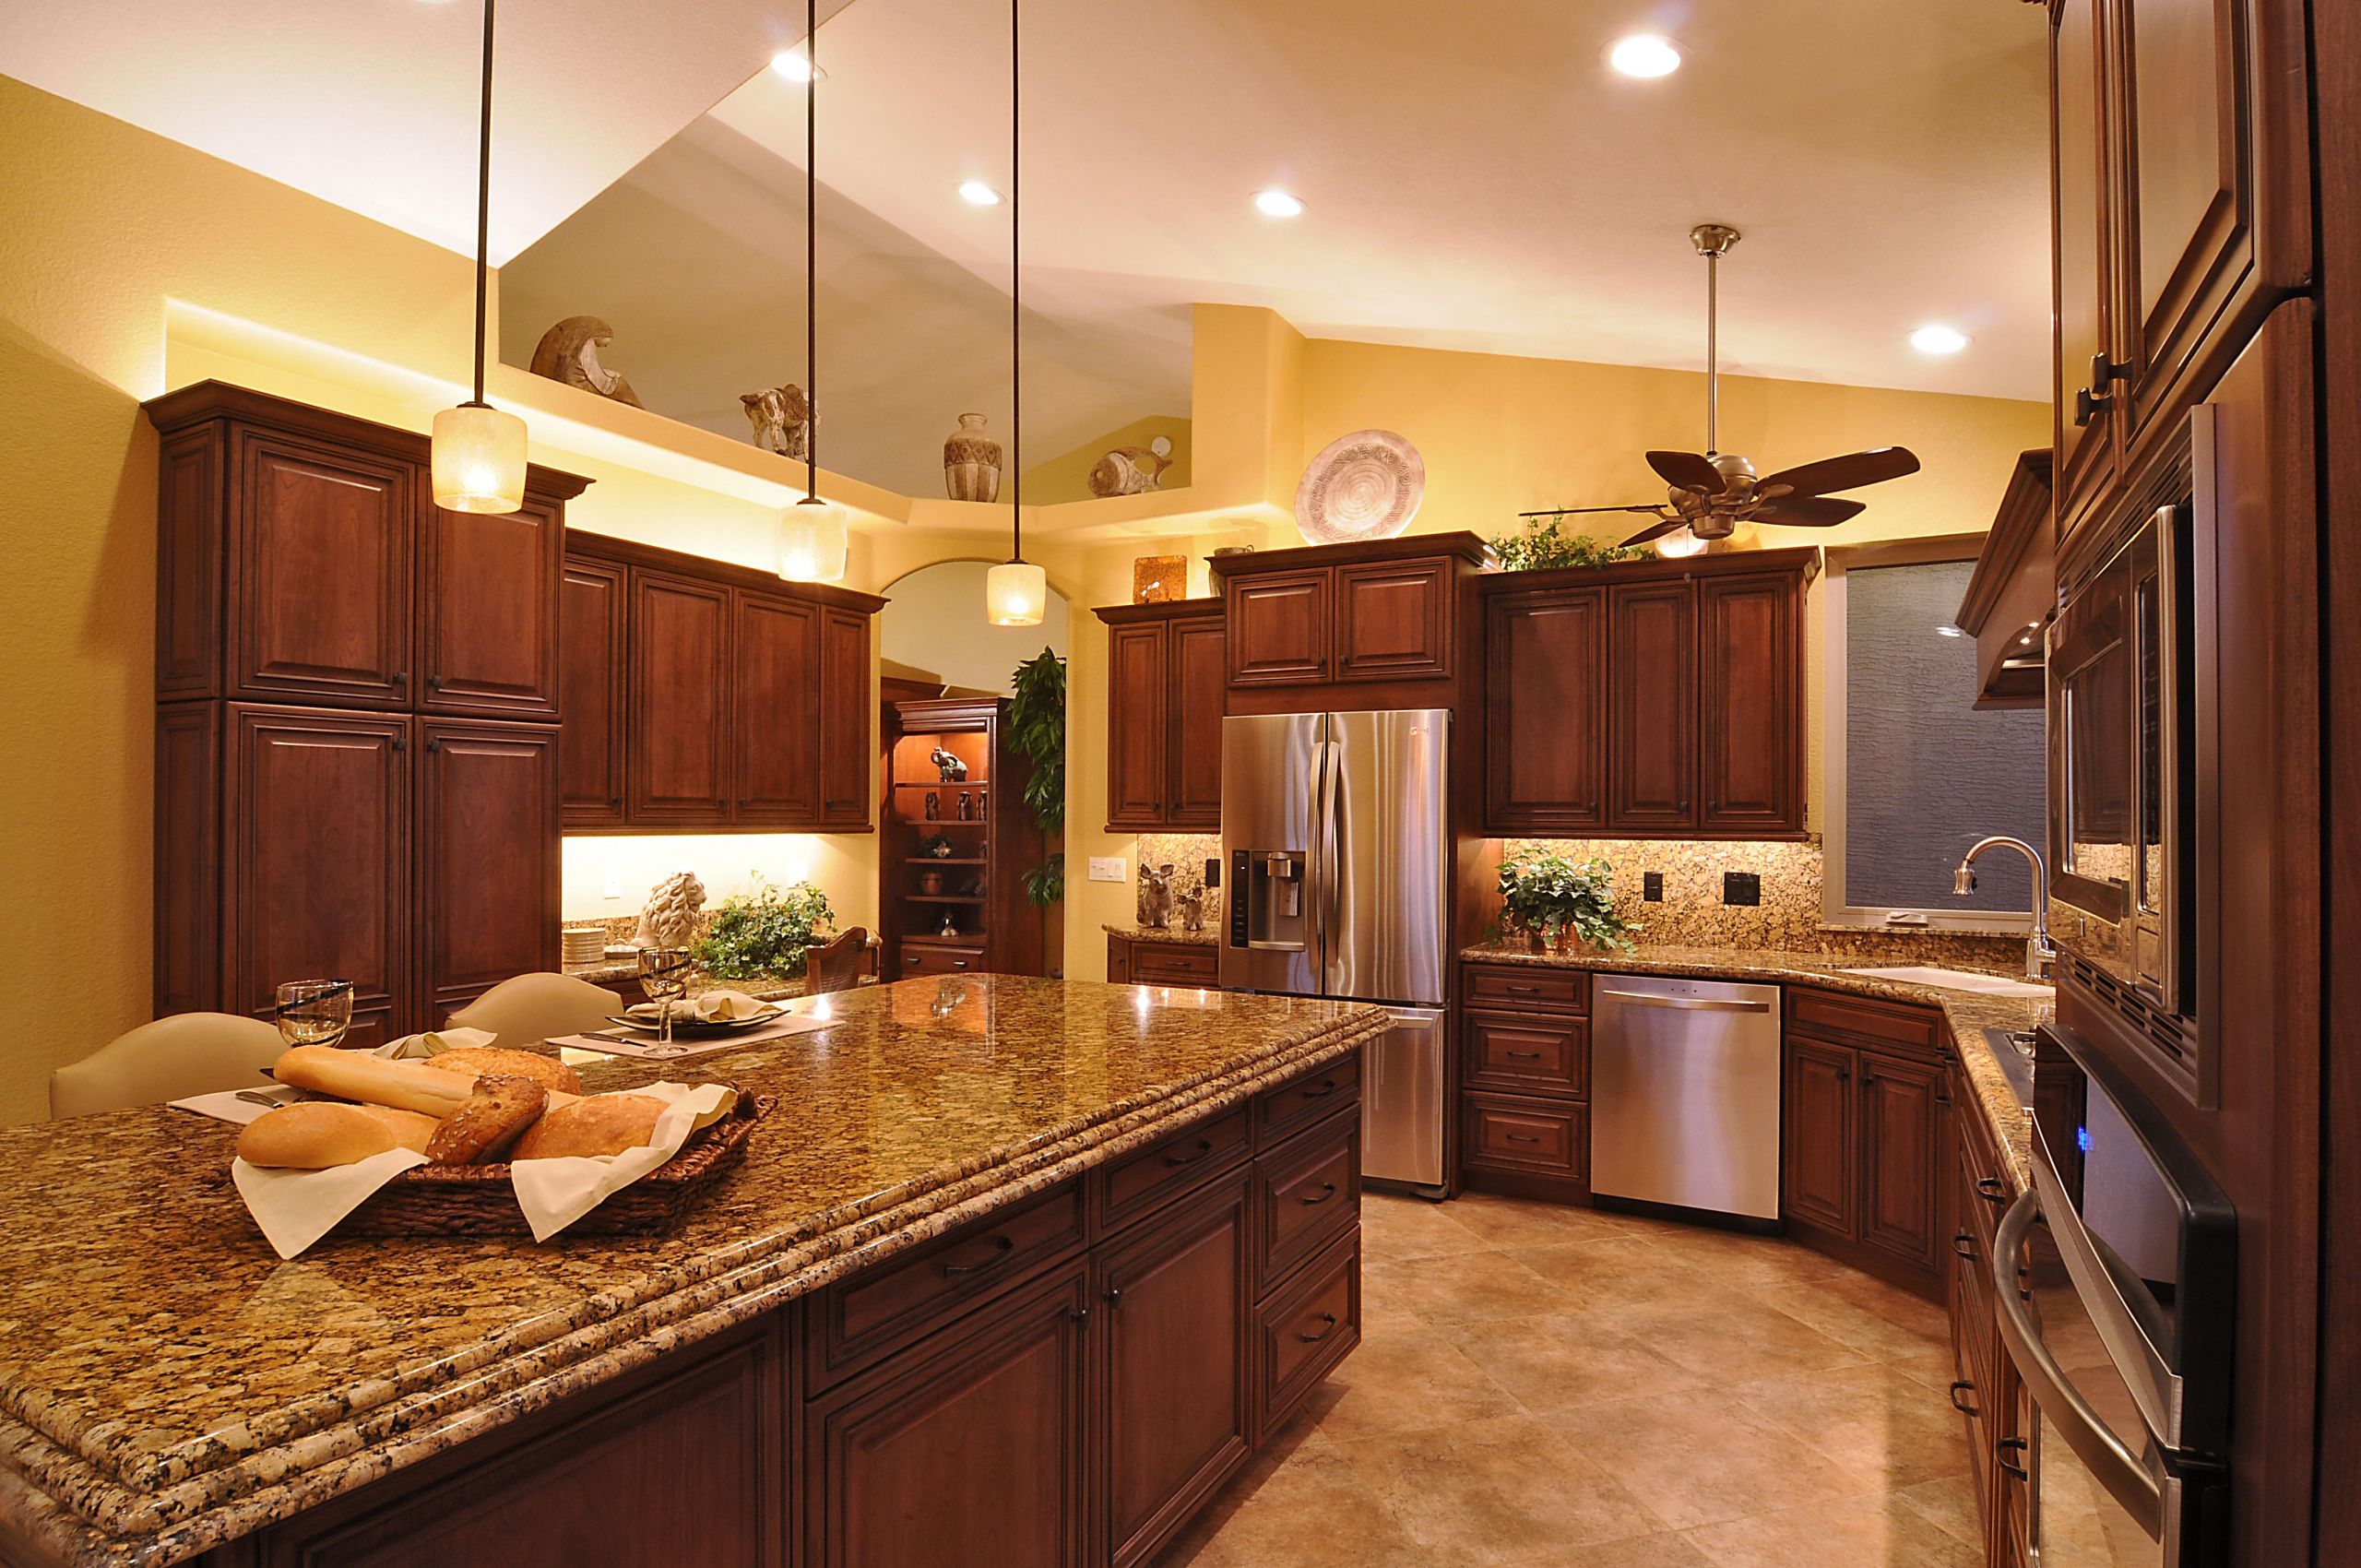 Complete Kitchen Remodeling
 This was a plete kitchen remodel designed to fit their